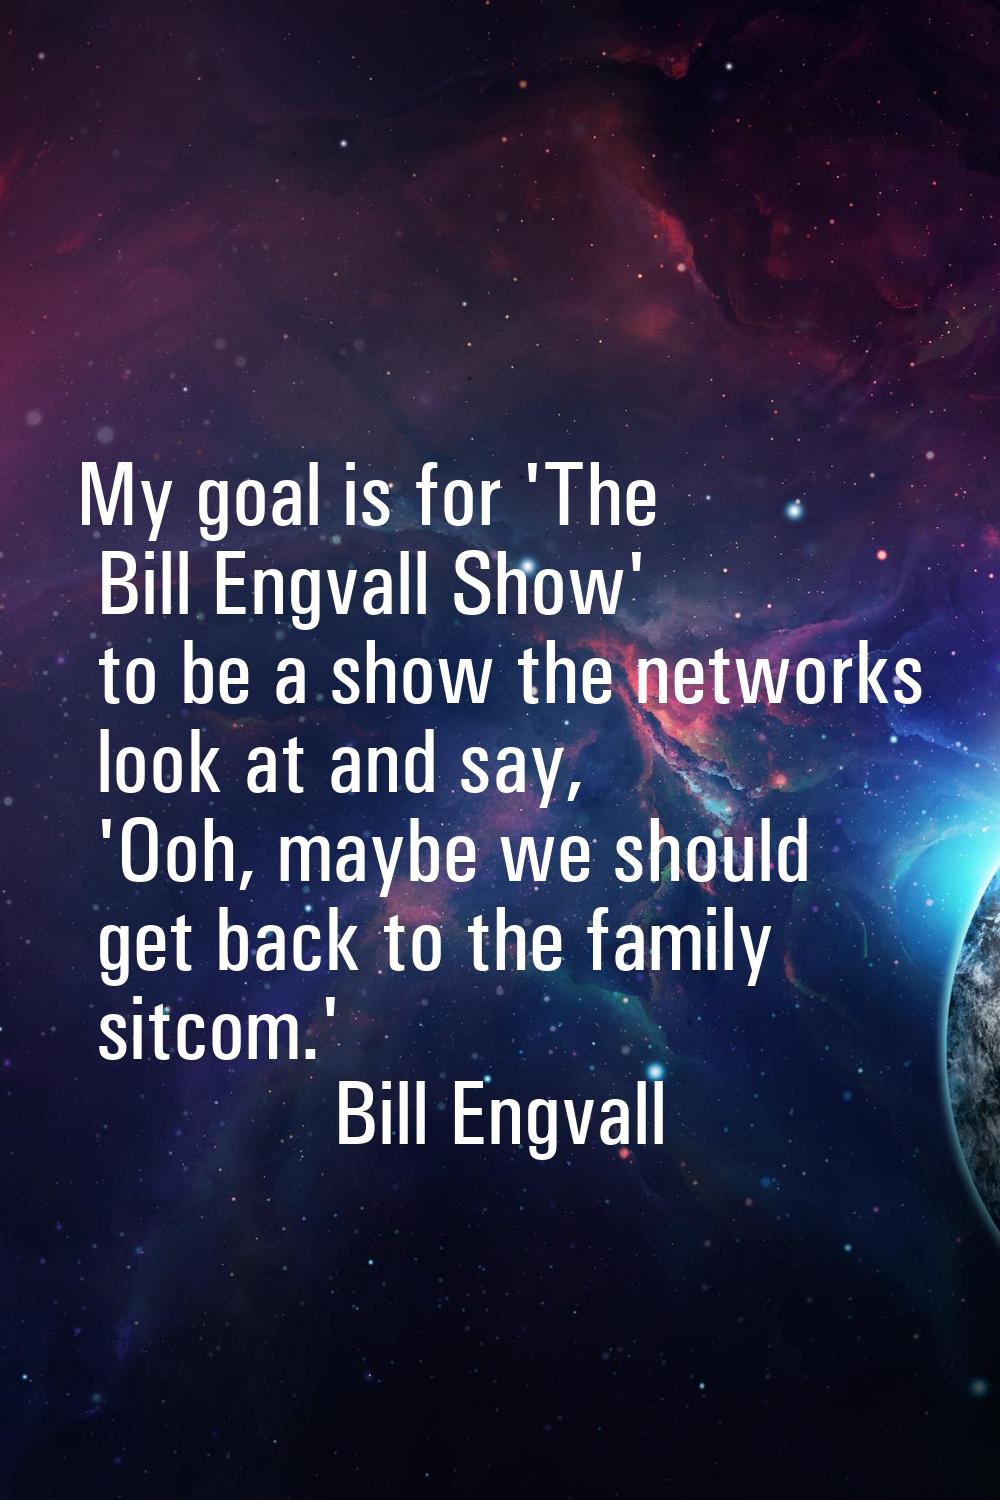 My goal is for 'The Bill Engvall Show' to be a show the networks look at and say, 'Ooh, maybe we sh